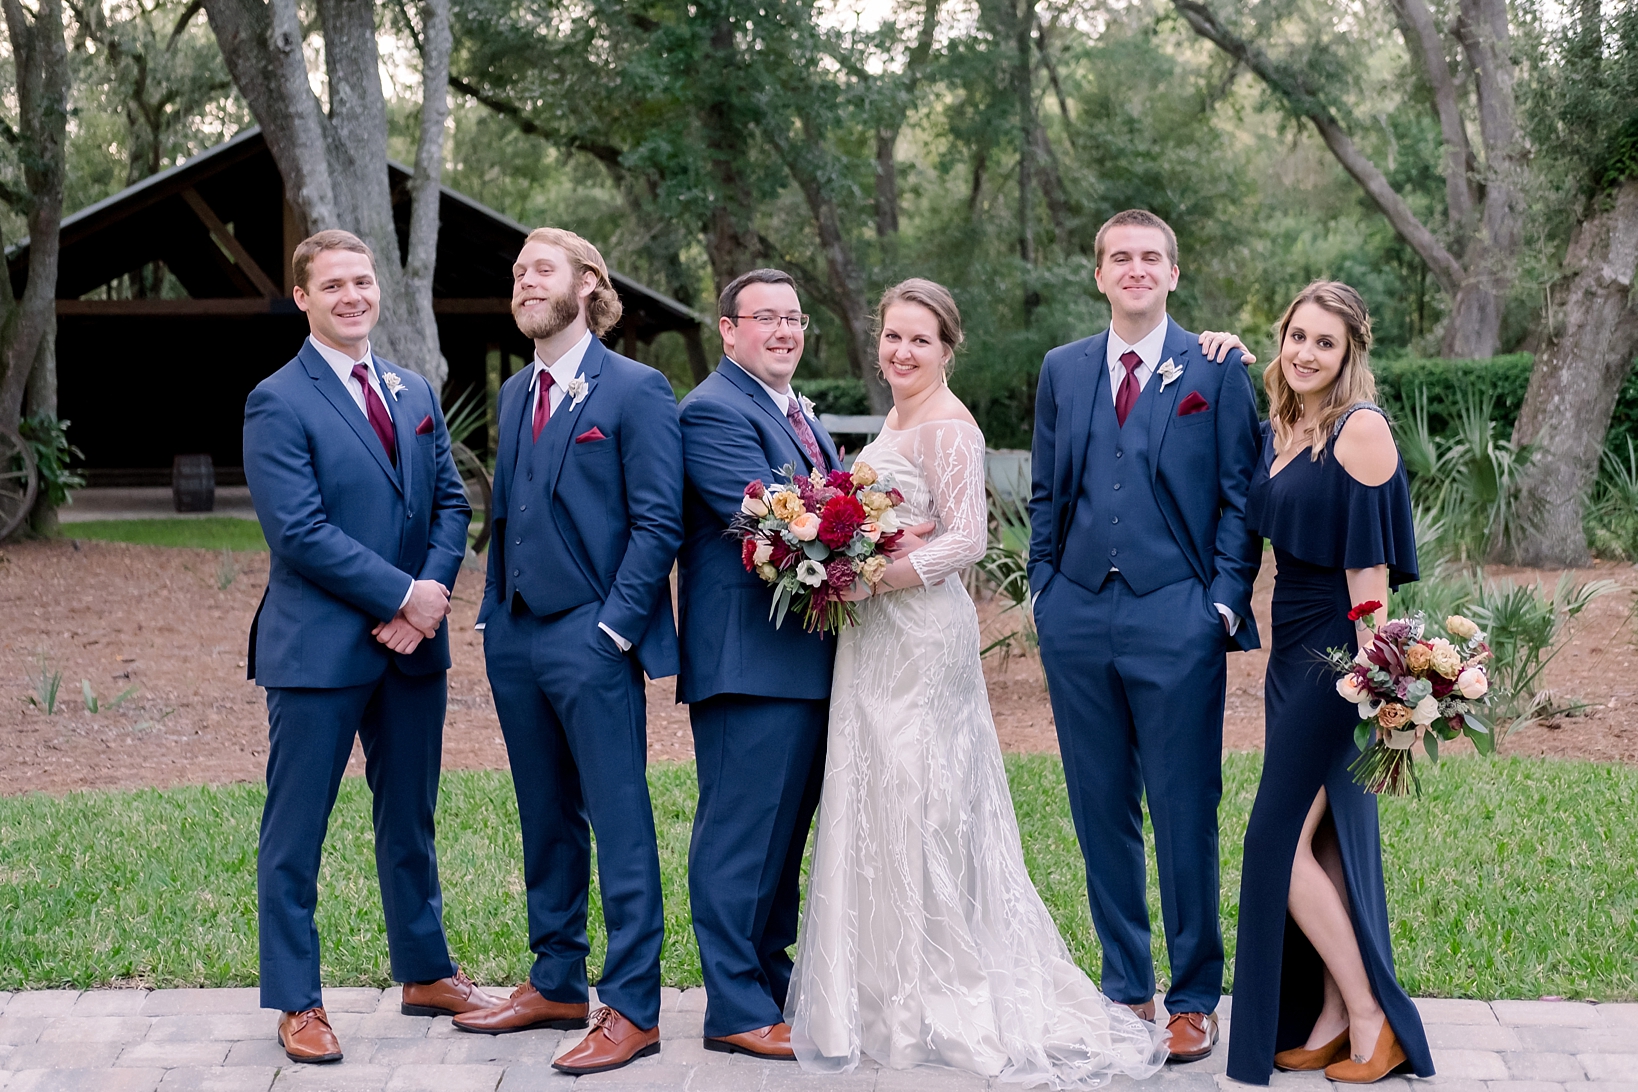 The wedding party pose along a brick path at Bowing Oaks Plantation in Jacksonville, FL